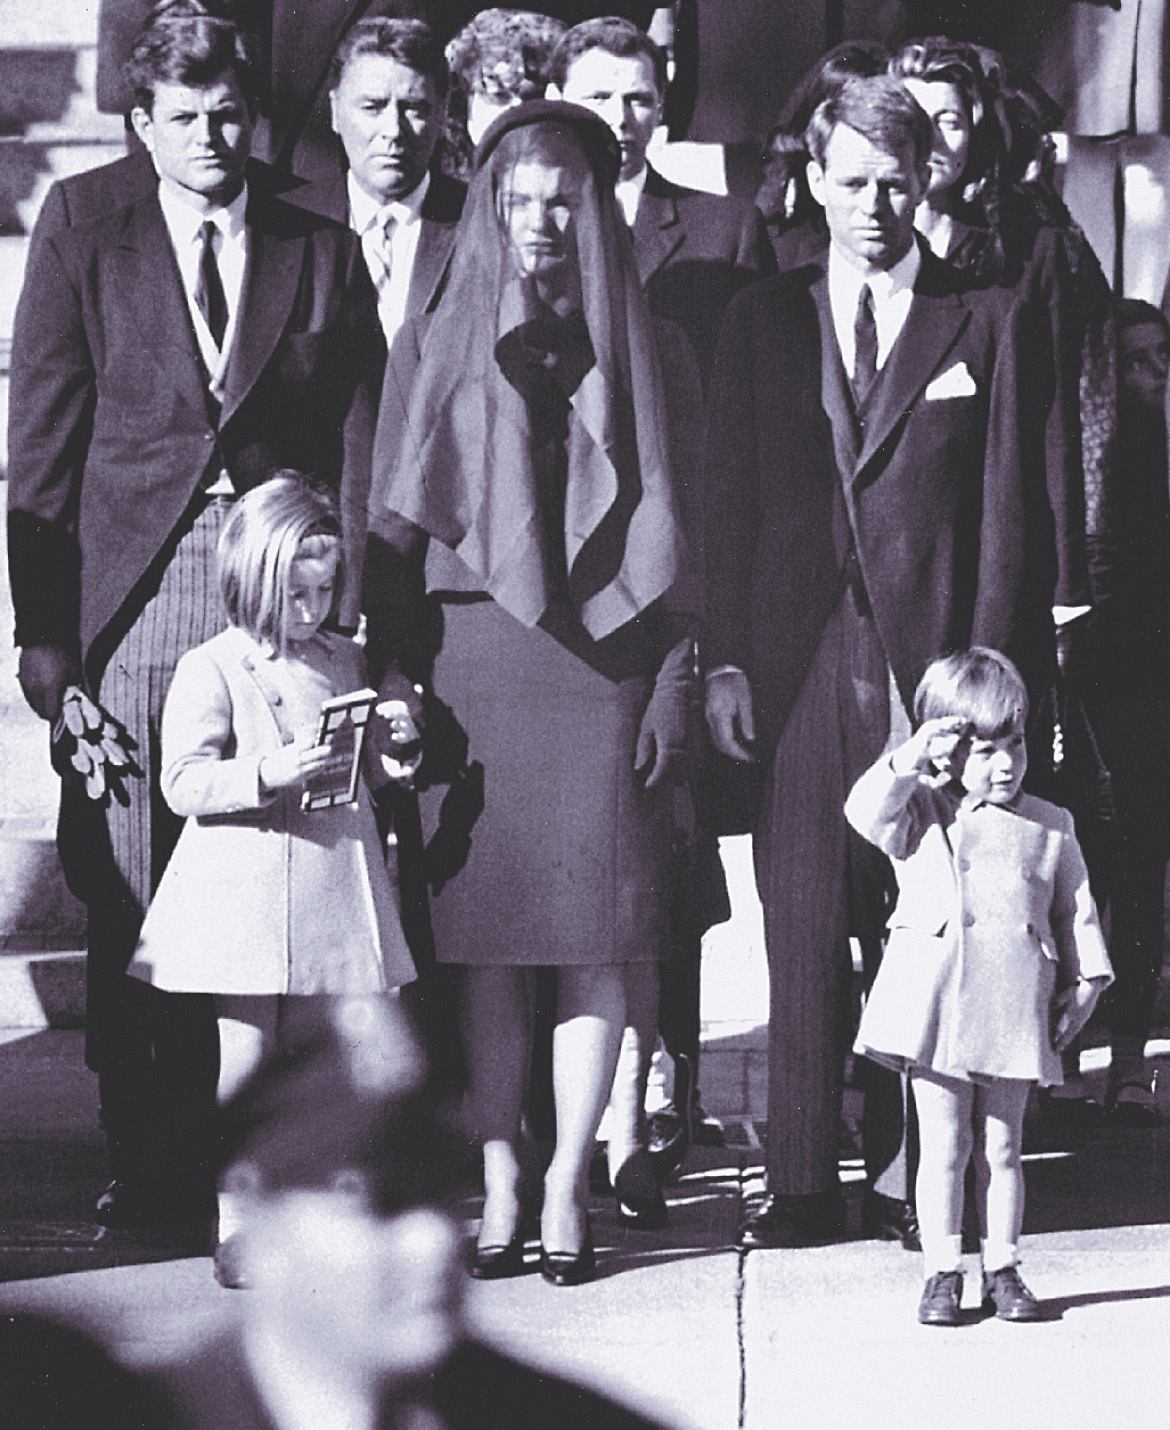 Photo: John Kennedy's family attends the funeral. Three-year-old John Jr. salutes.